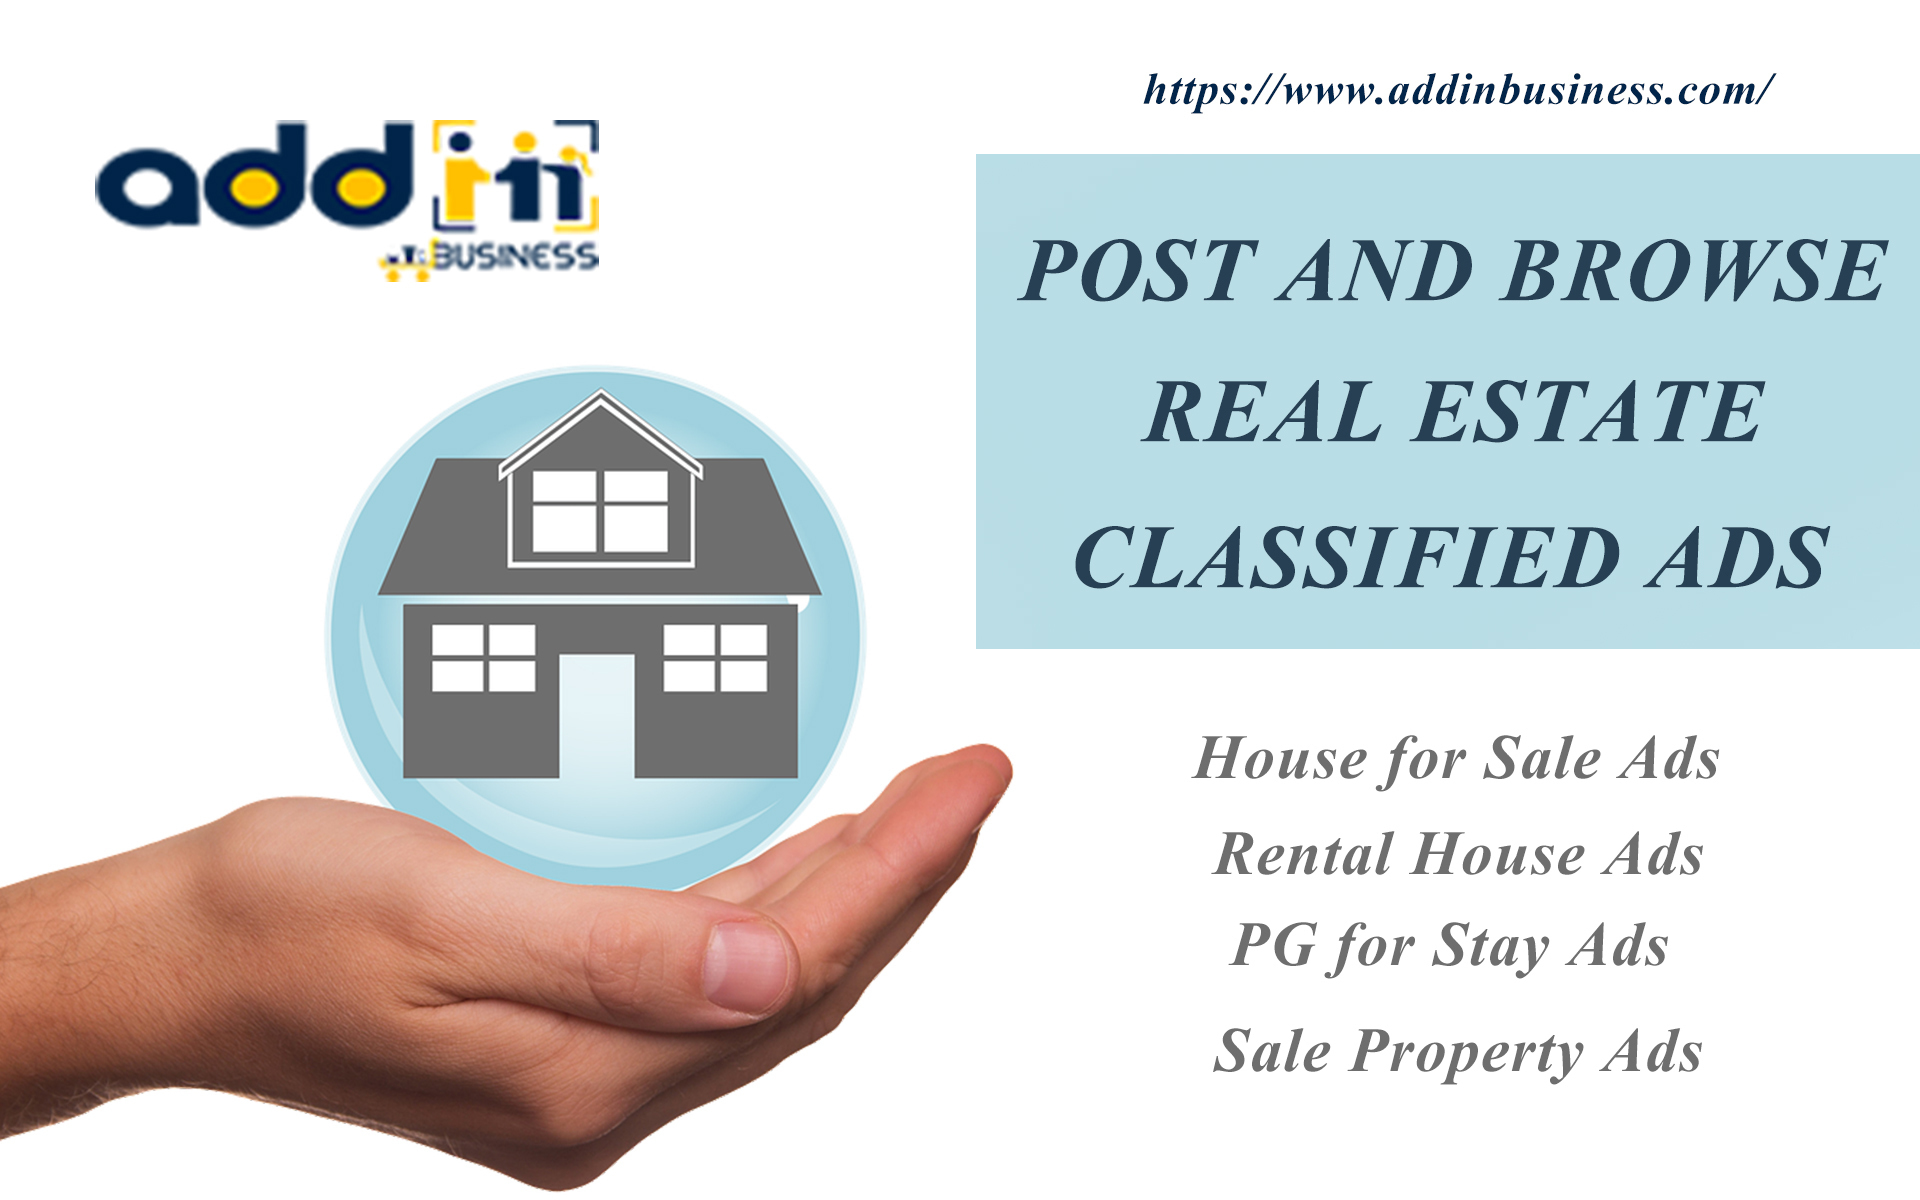 Classified ads. Real Estate classifieds. Real Estate advertisement.